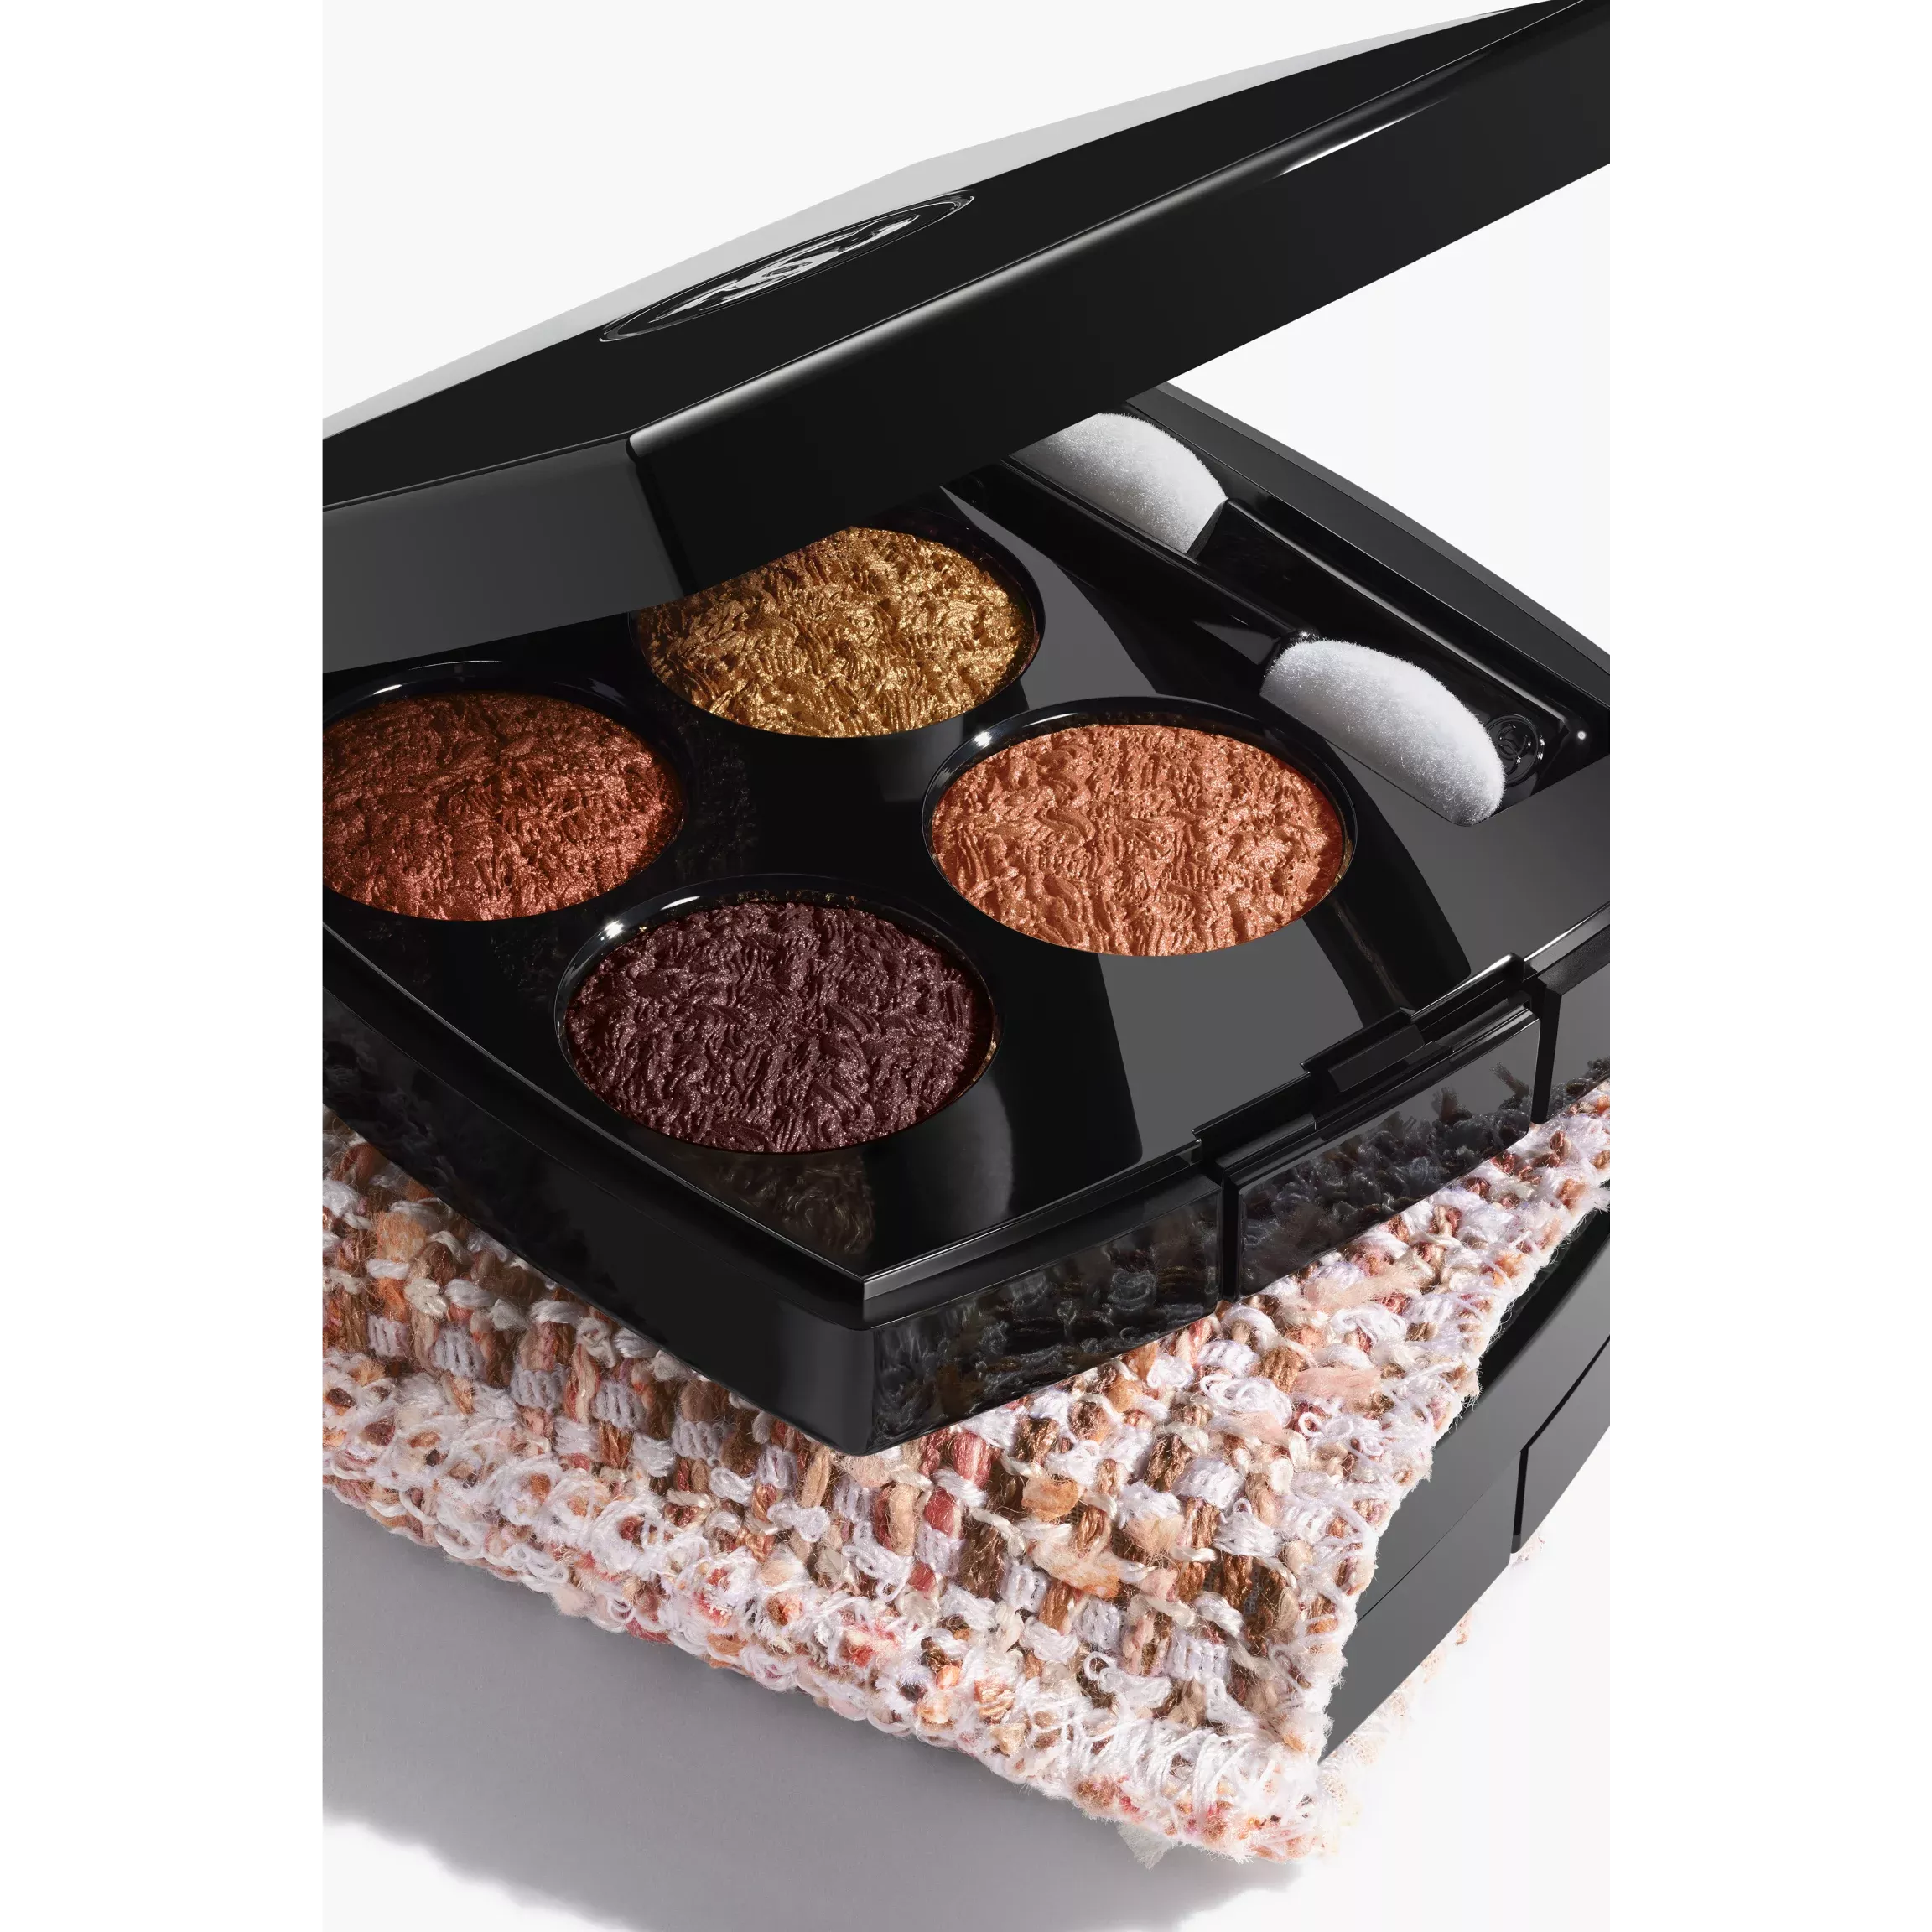 CHANEL Les 4 Ombres Tweed Limited-Edition Multi-Effect Quadra Eyeshadow 